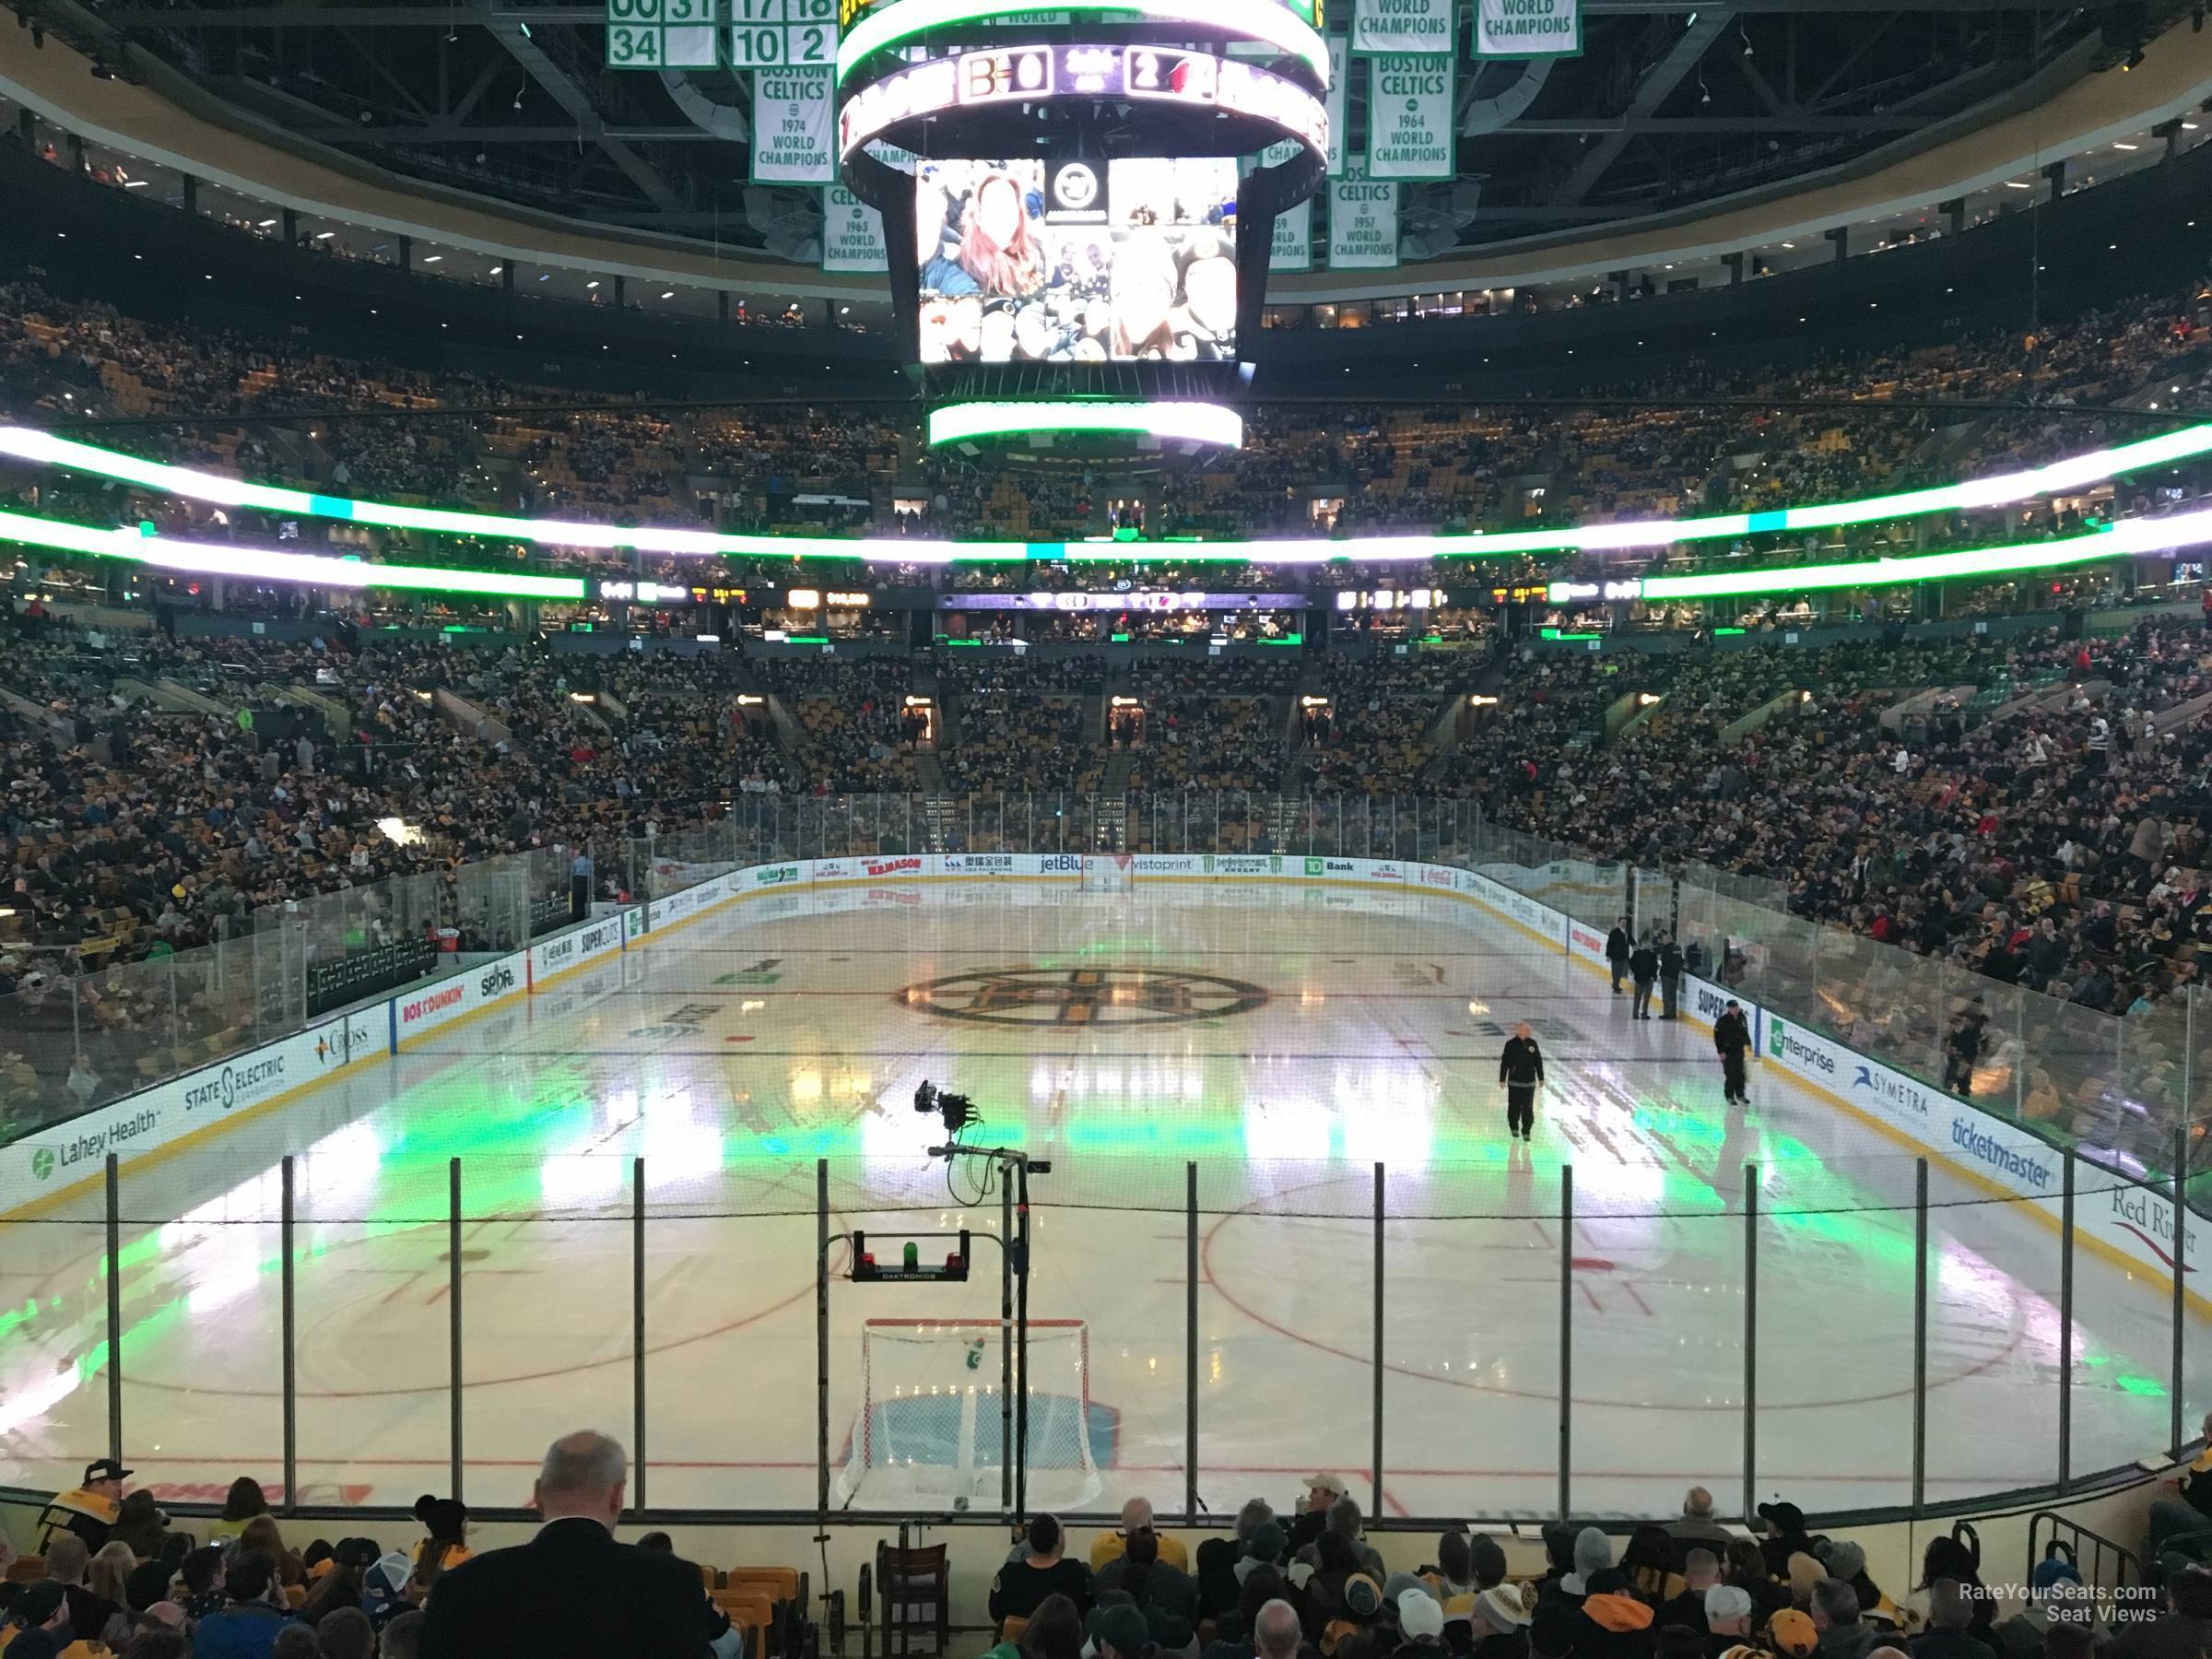 loge 17, row 15 seat view  for hockey - td garden